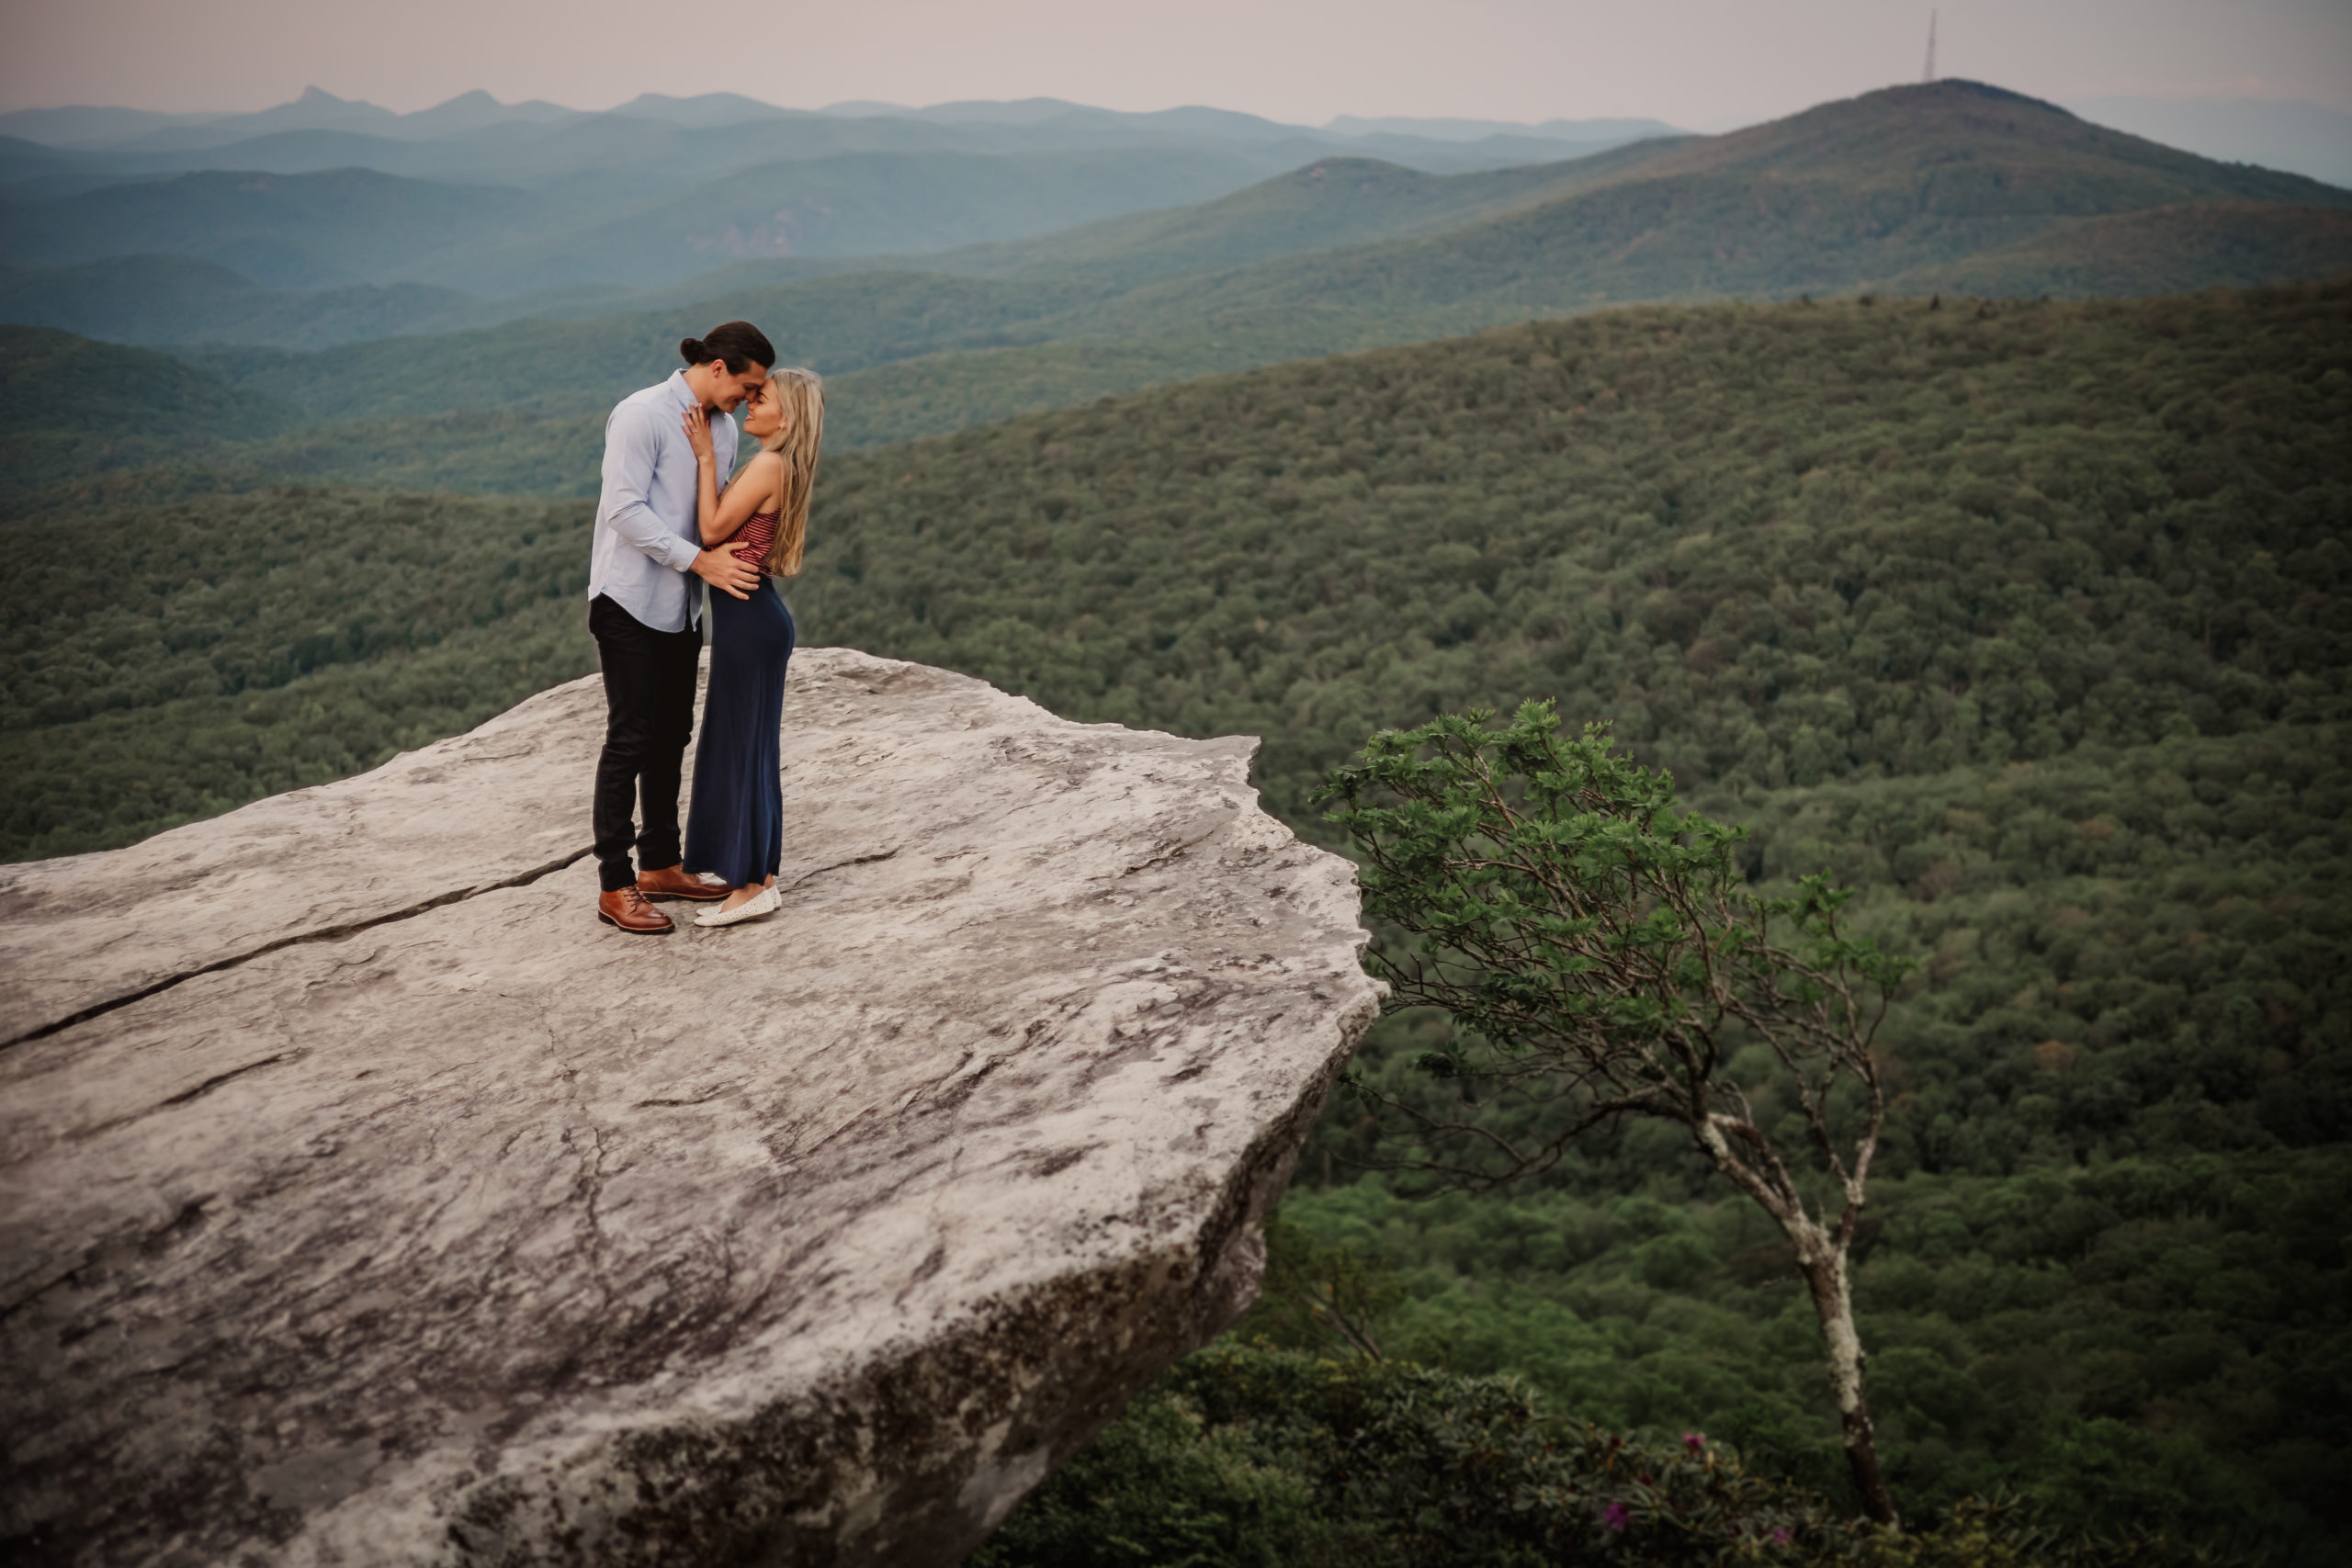 A couple embracing at sunrise in the mountains